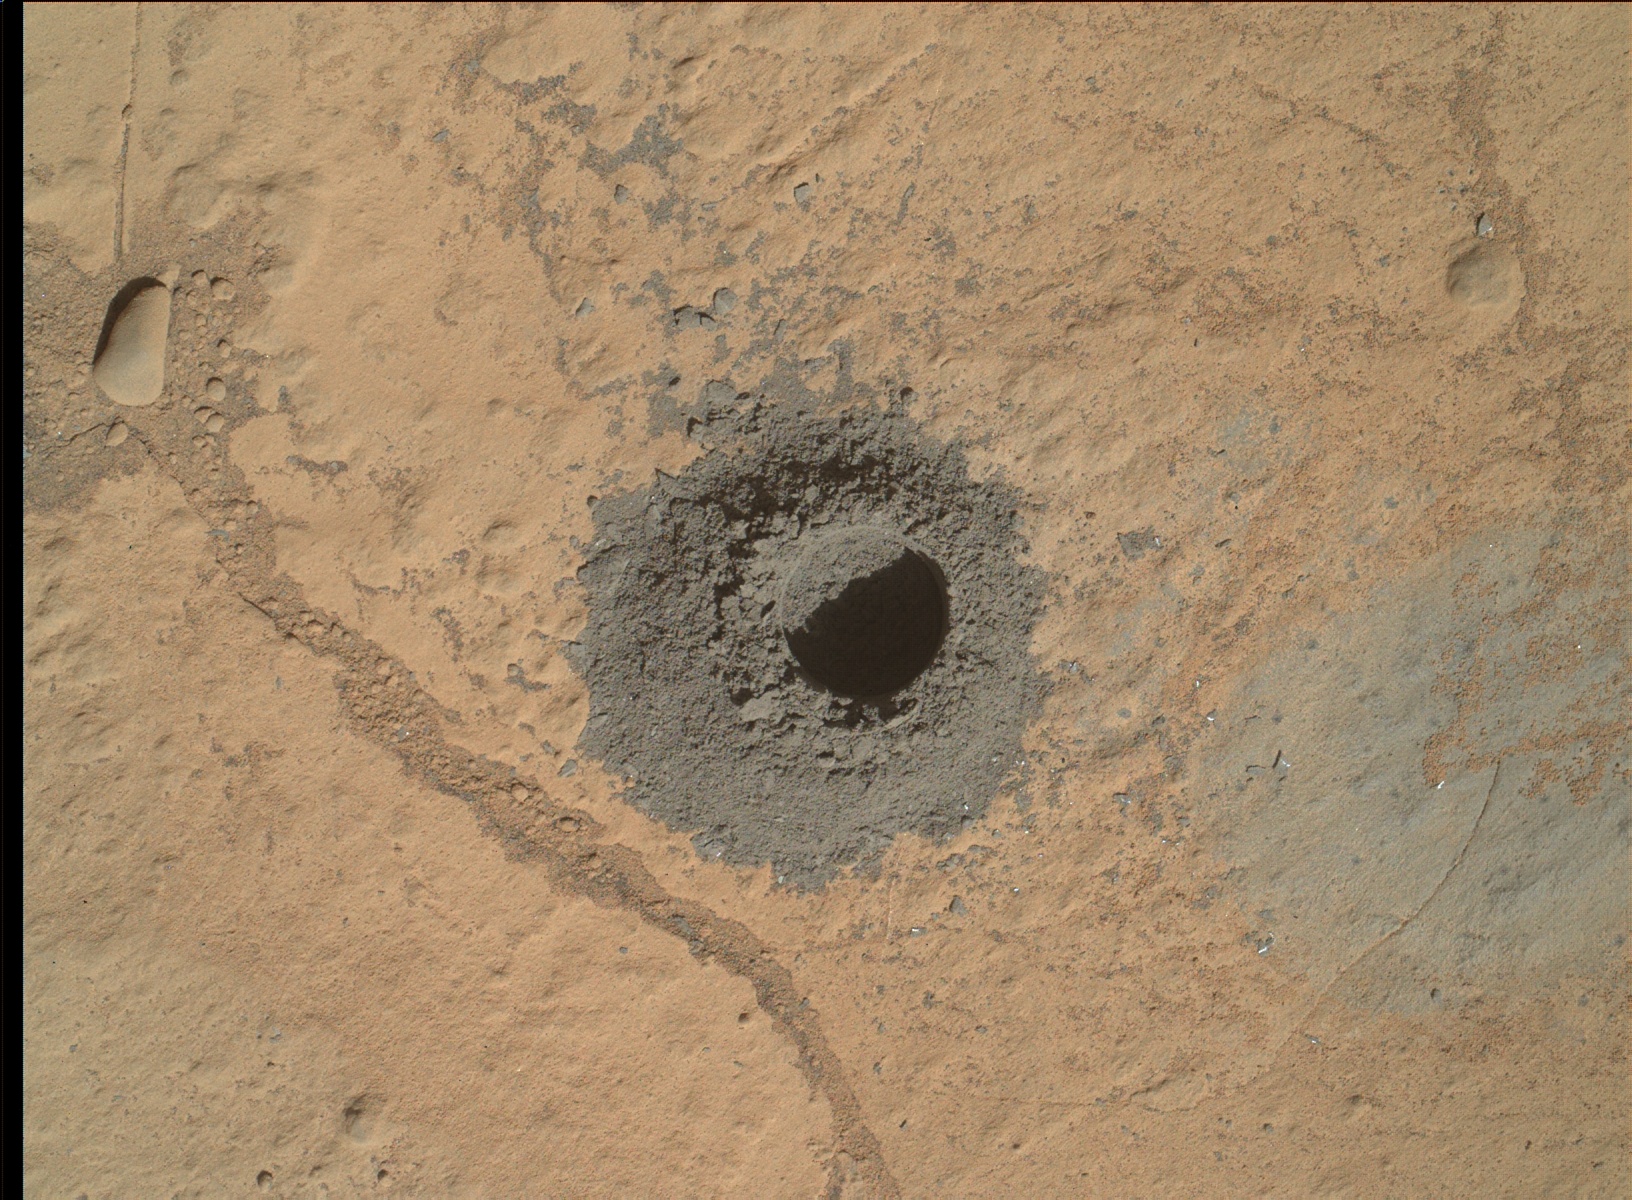 Nasa's Mars rover Curiosity acquired this image using its Mars Hand Lens Imager (MAHLI) on Sol 615, at drive 1330, site number 31